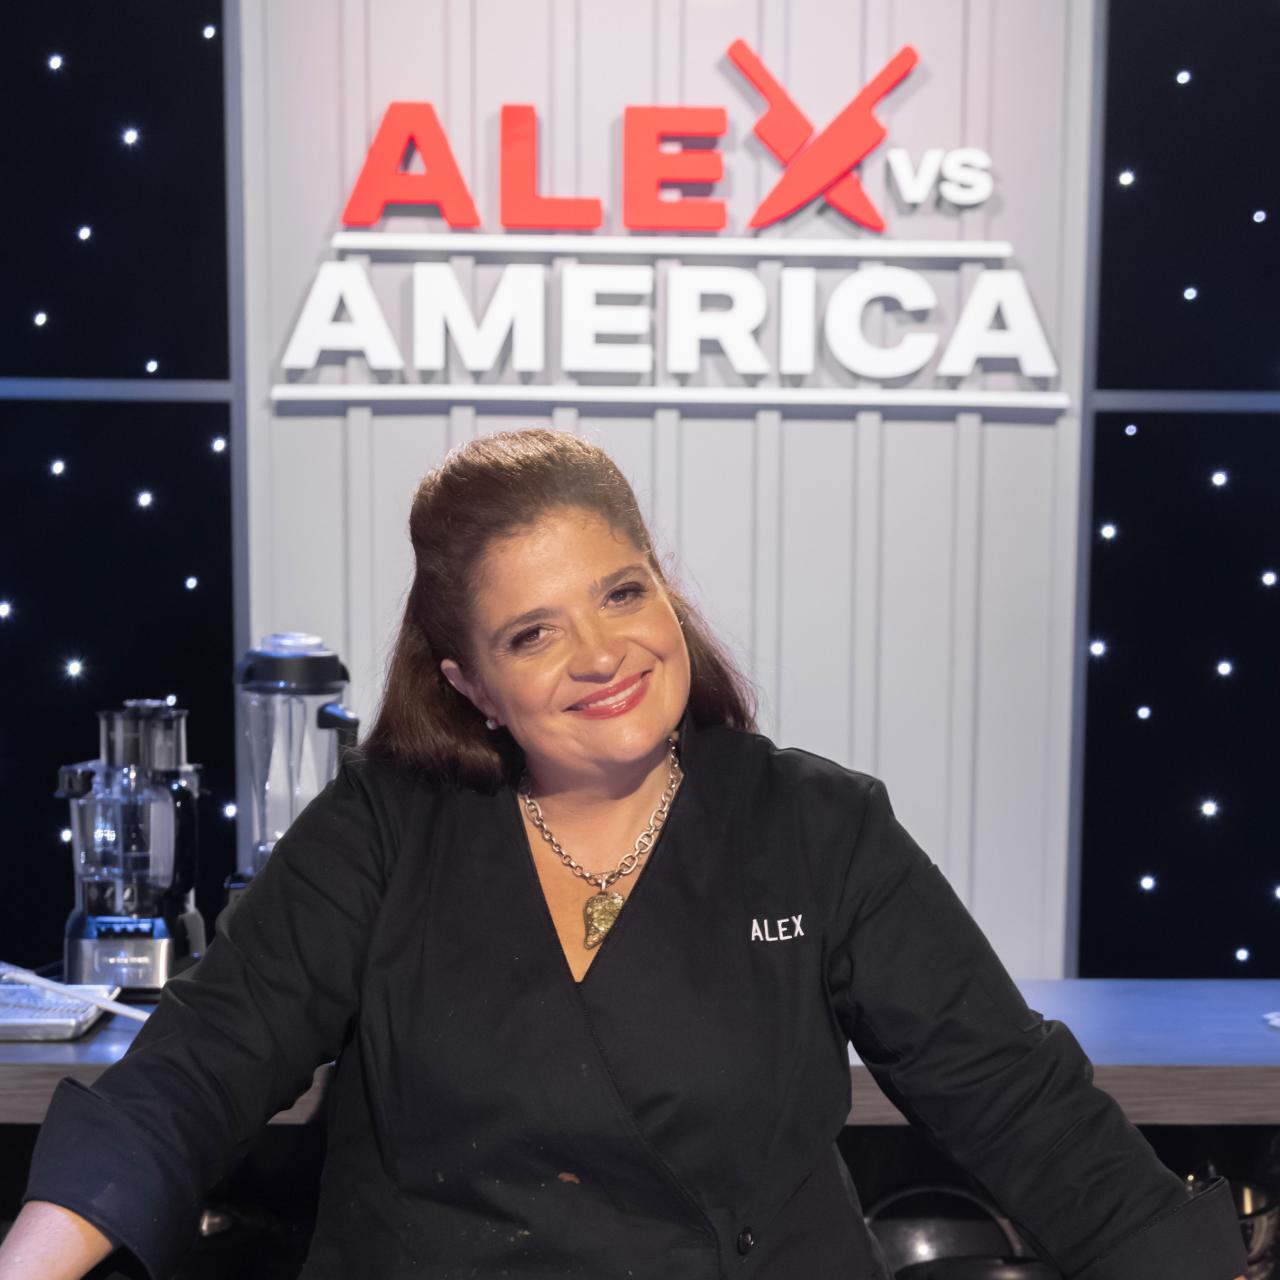 Alex Guarnaschelli Battles Chefs From Across The Country In New Series Alex  vs America, FN Dish - Behind-the-Scenes, Food Trends, and Best Recipes :  Food Network